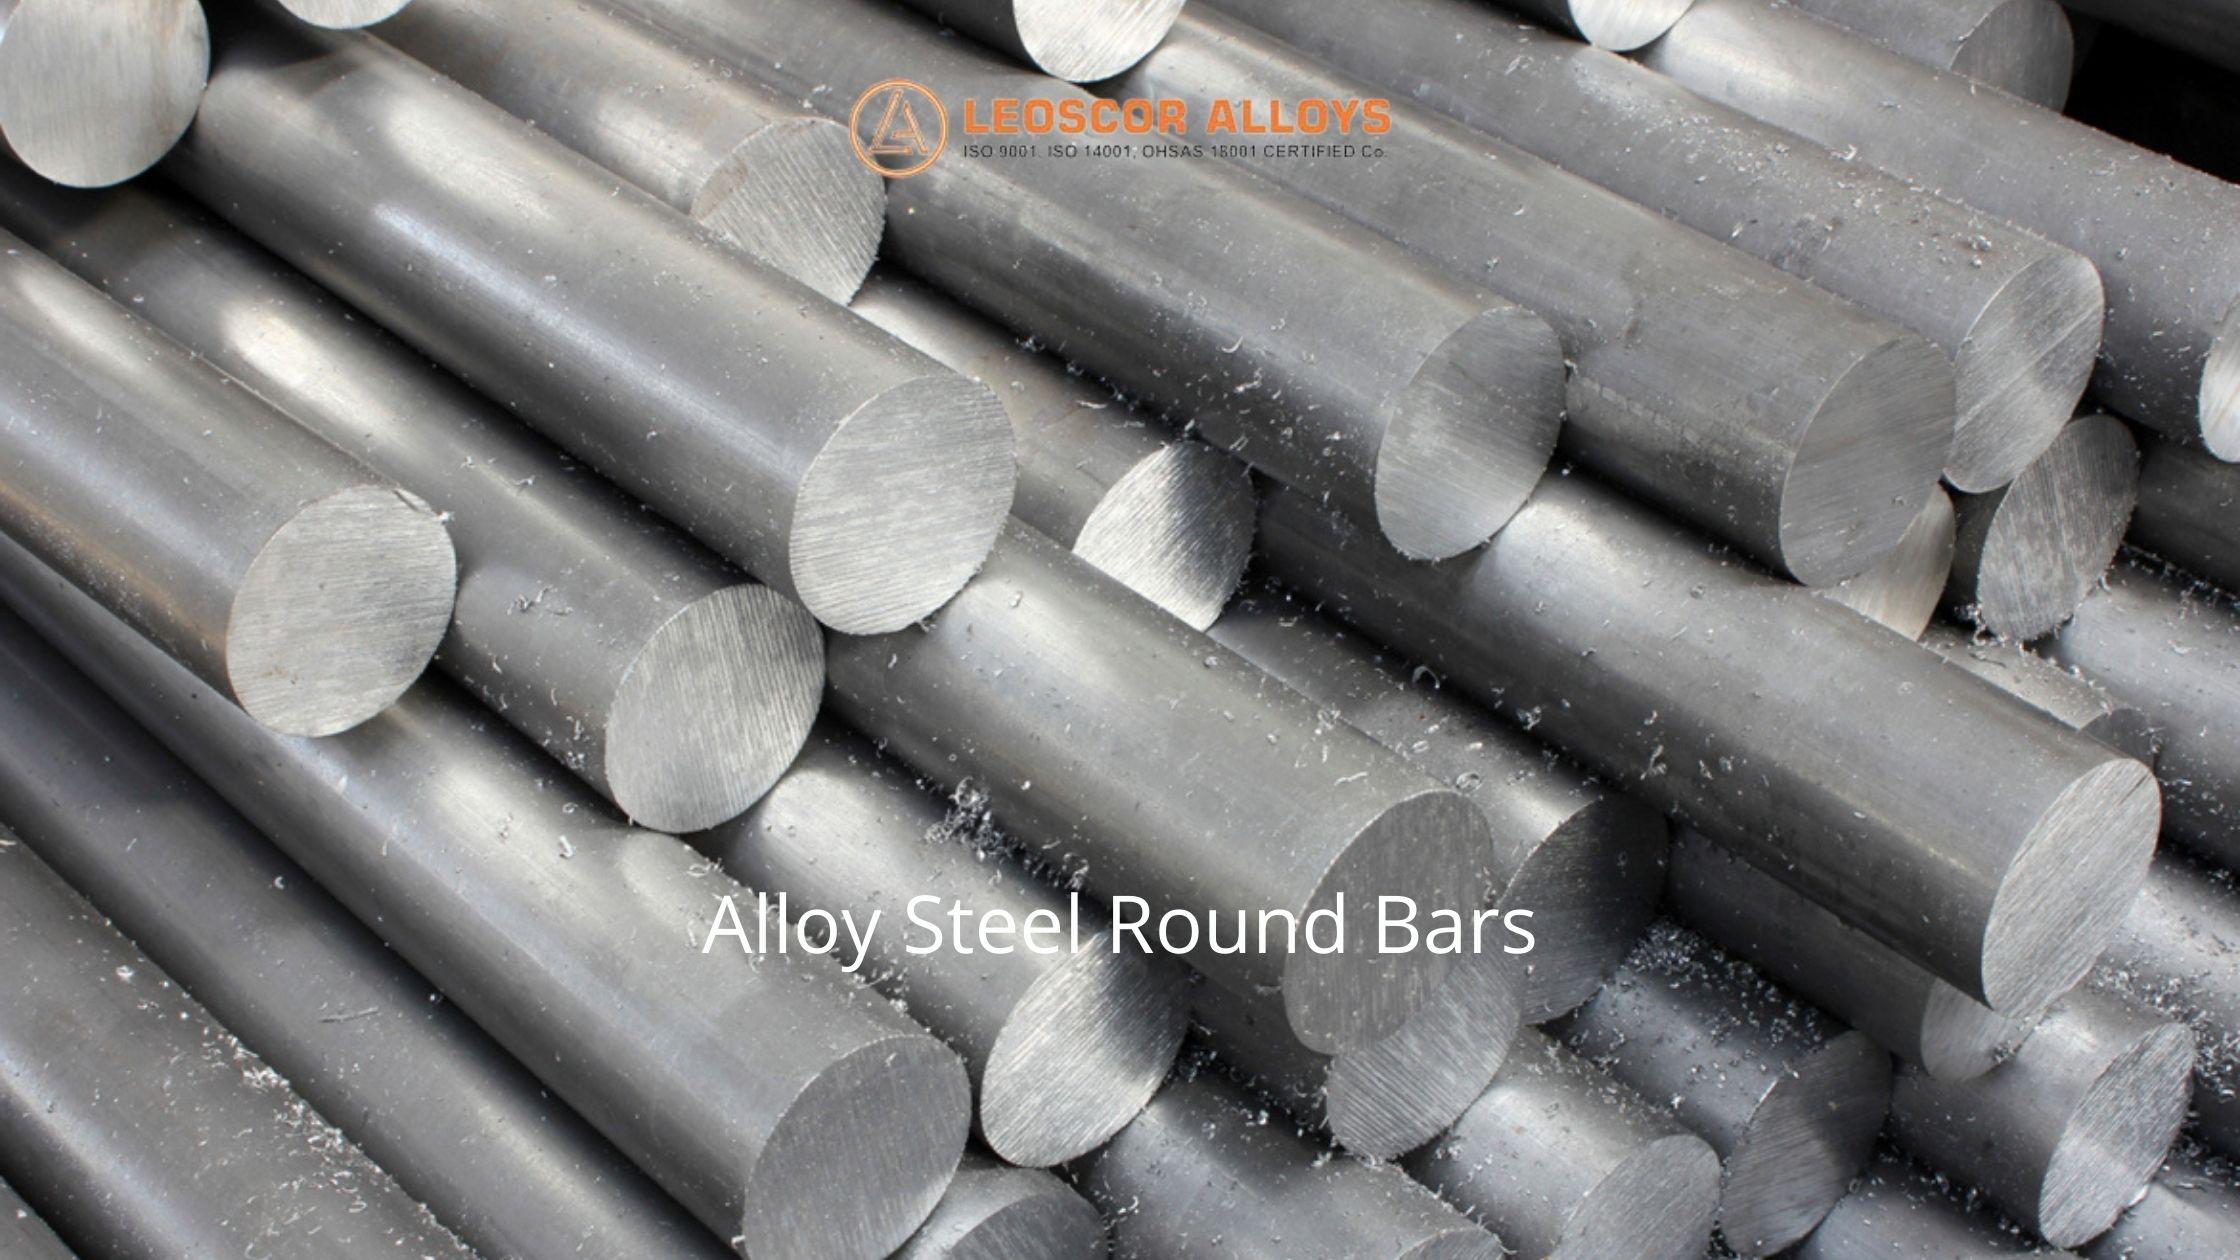 What are the advantages of Buying Alloy Steel Bars?